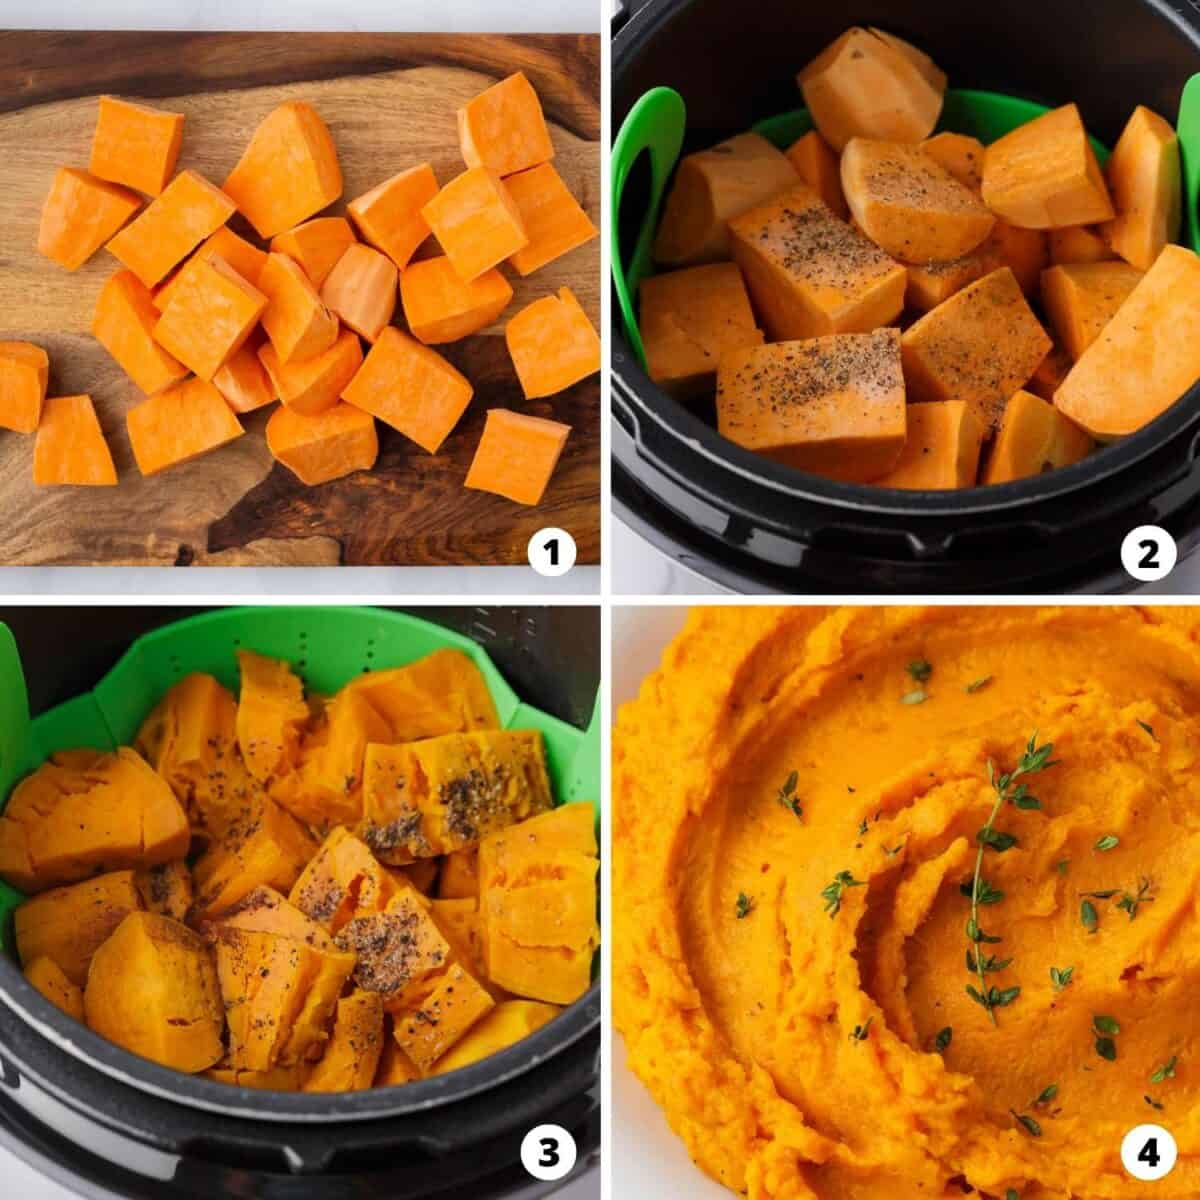 The process of how to make instant pot sweet potatoes in a 4 step collage.